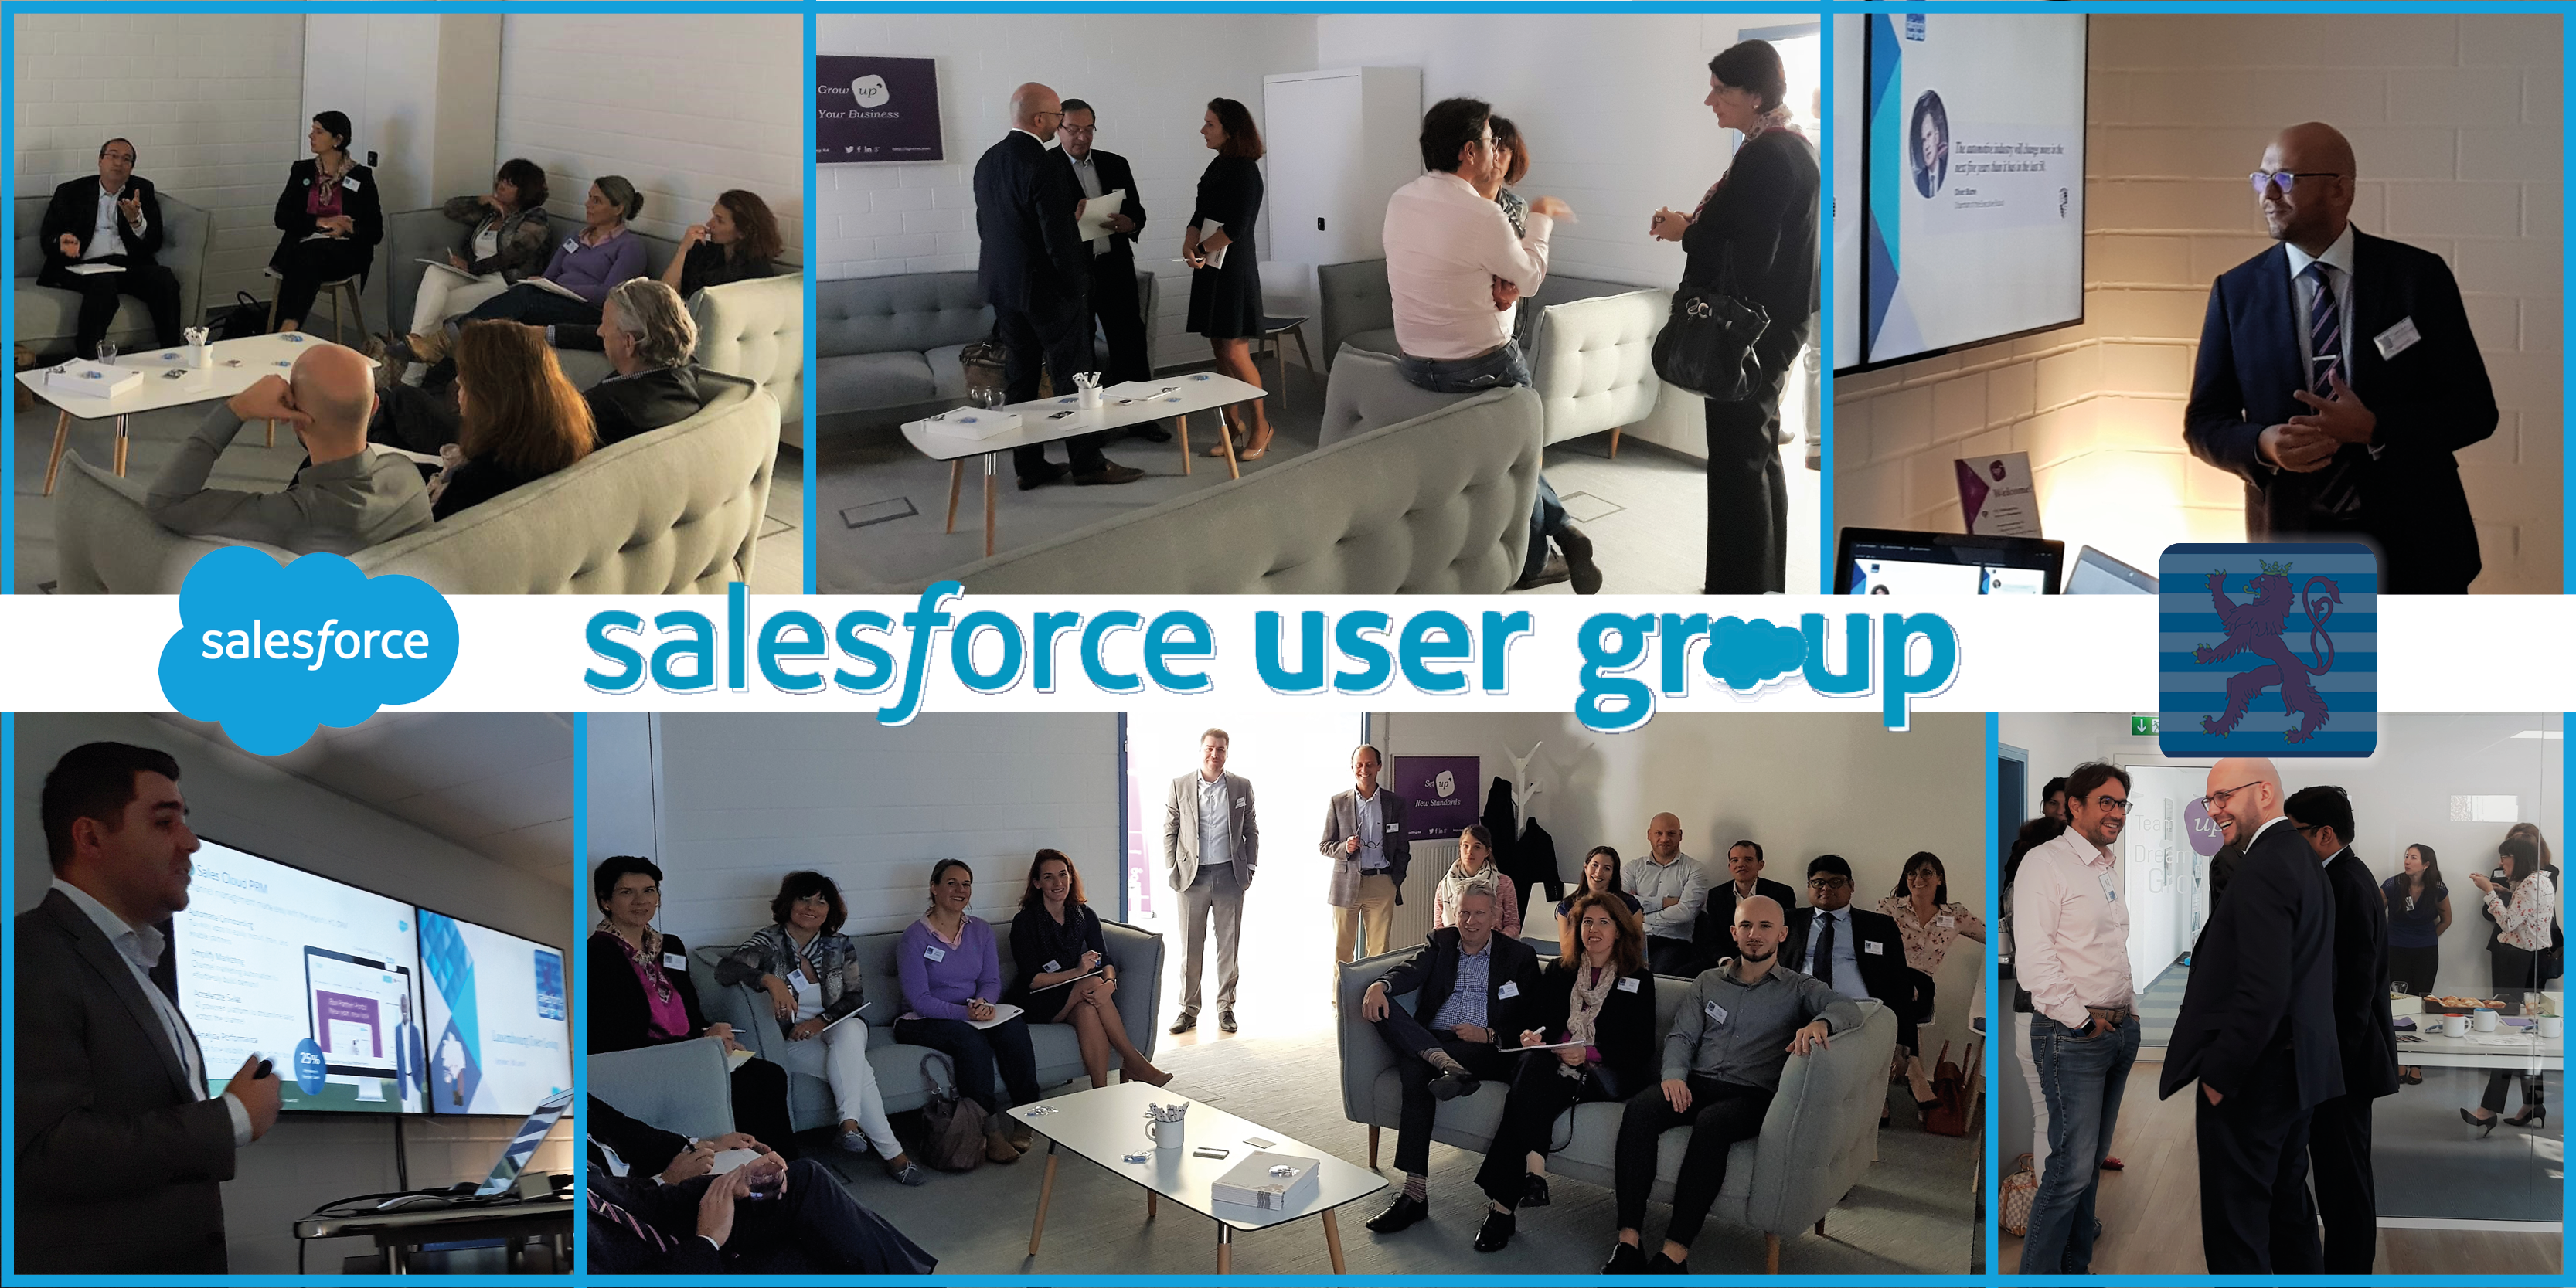 Luxembourg Salesforce User Group Members, October 8th event pictures